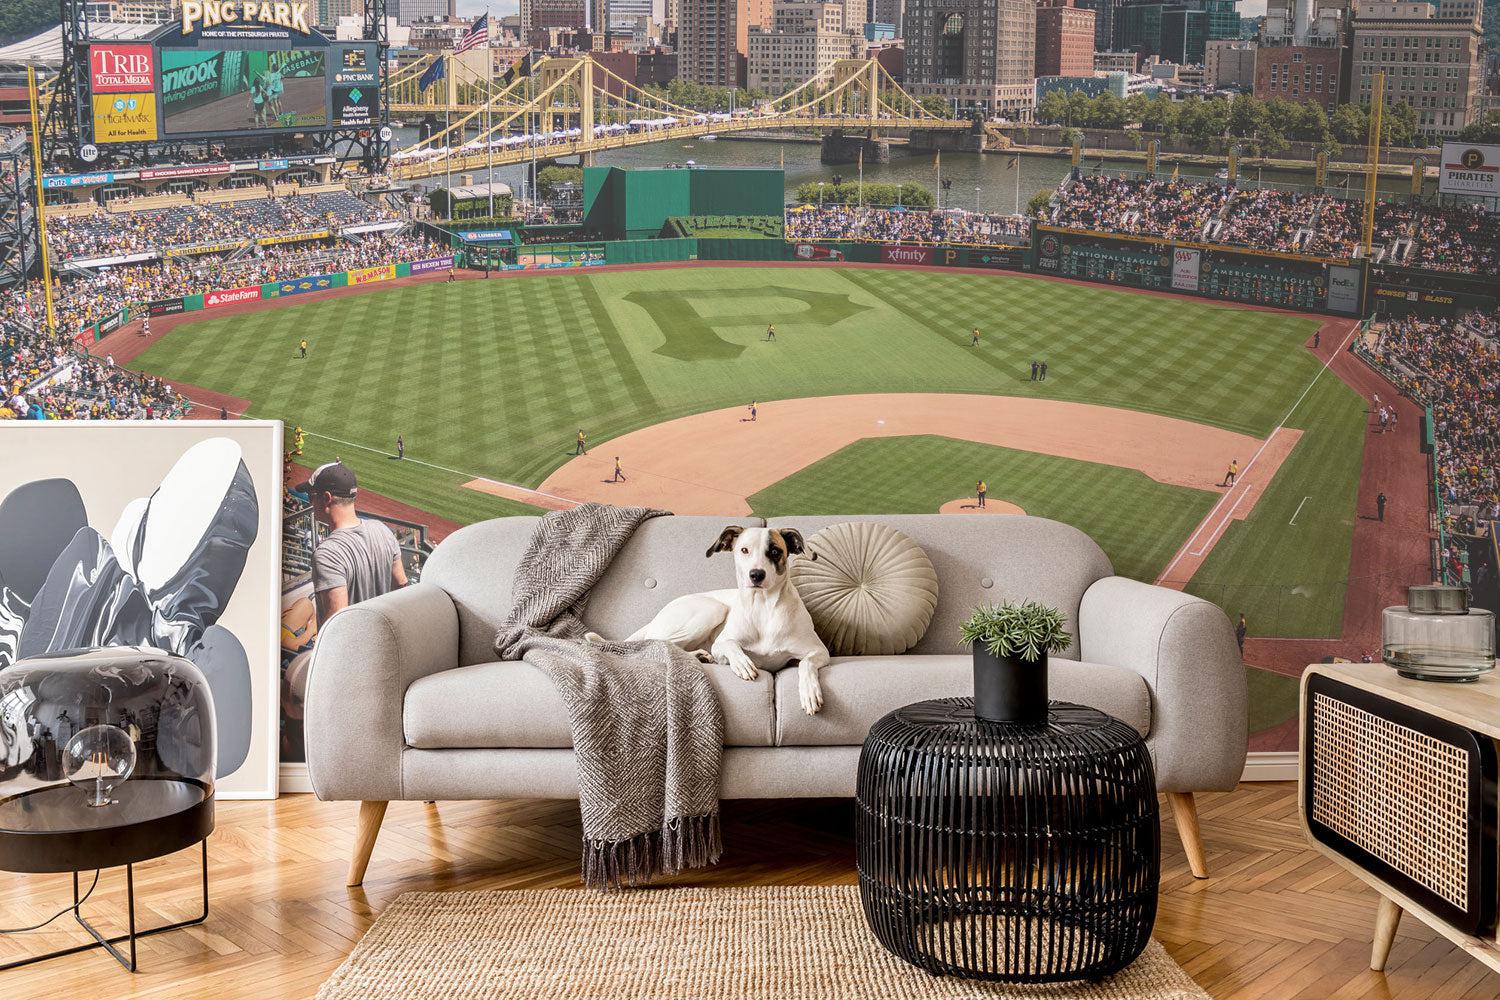 Pittsburgh Pirates/PNC Park Wall Mural